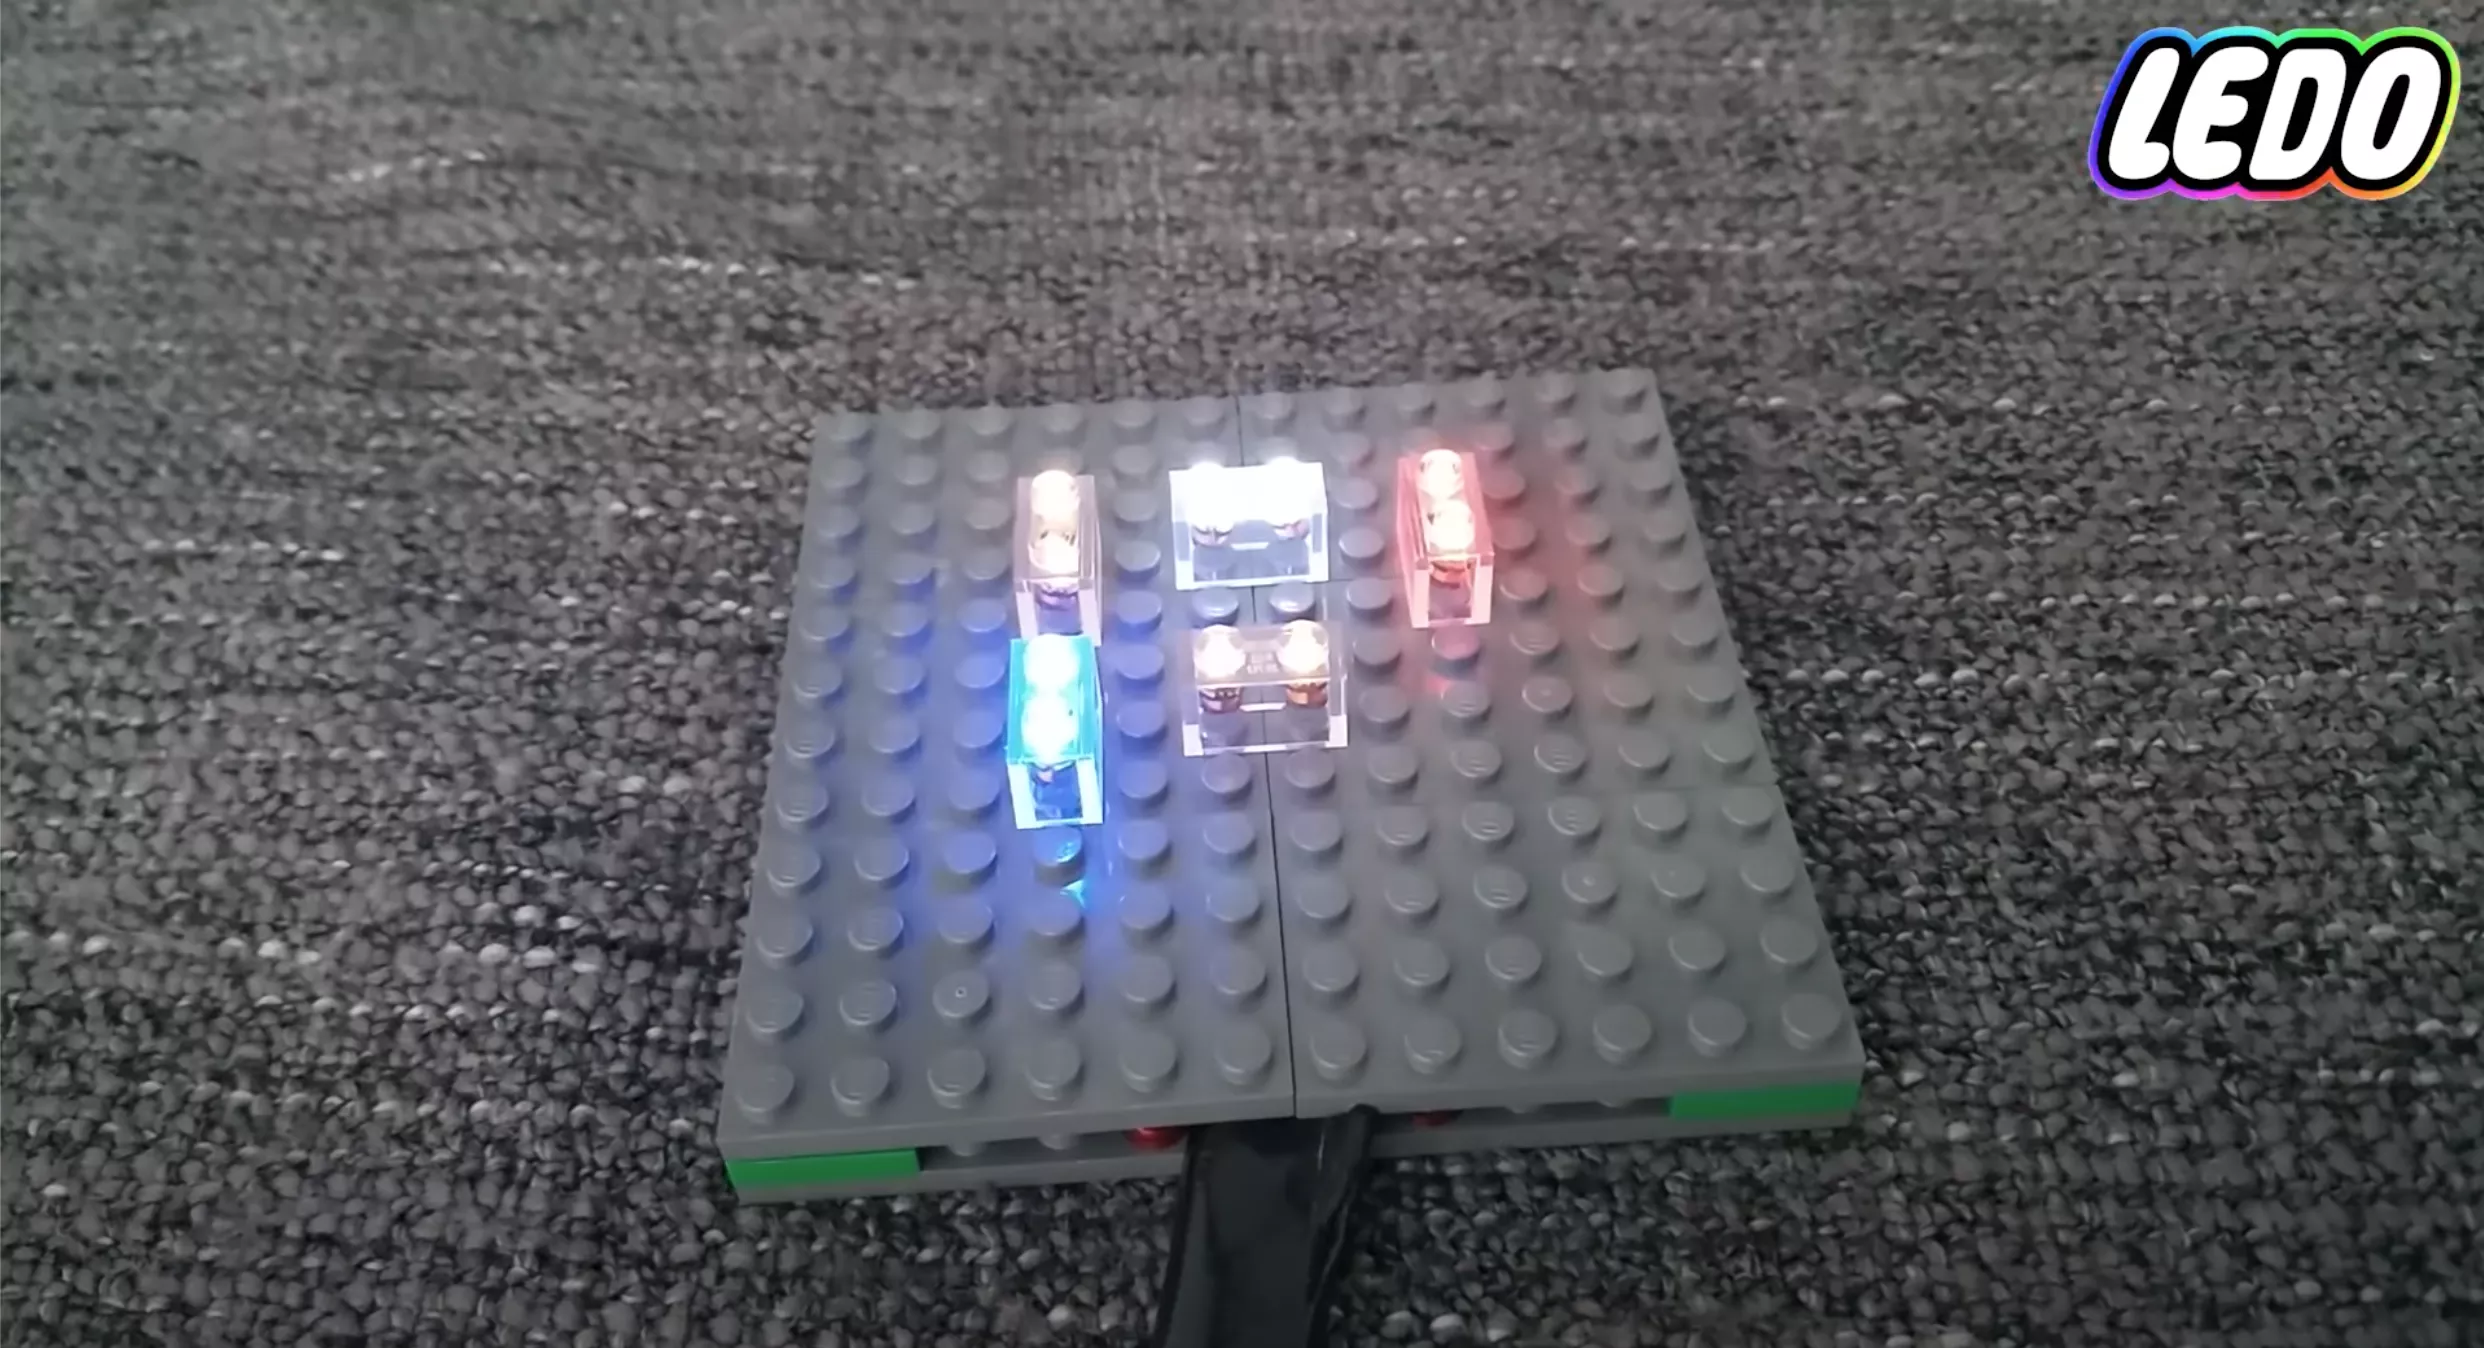 I wish they had these induction-powered LED Legos when I was a kid